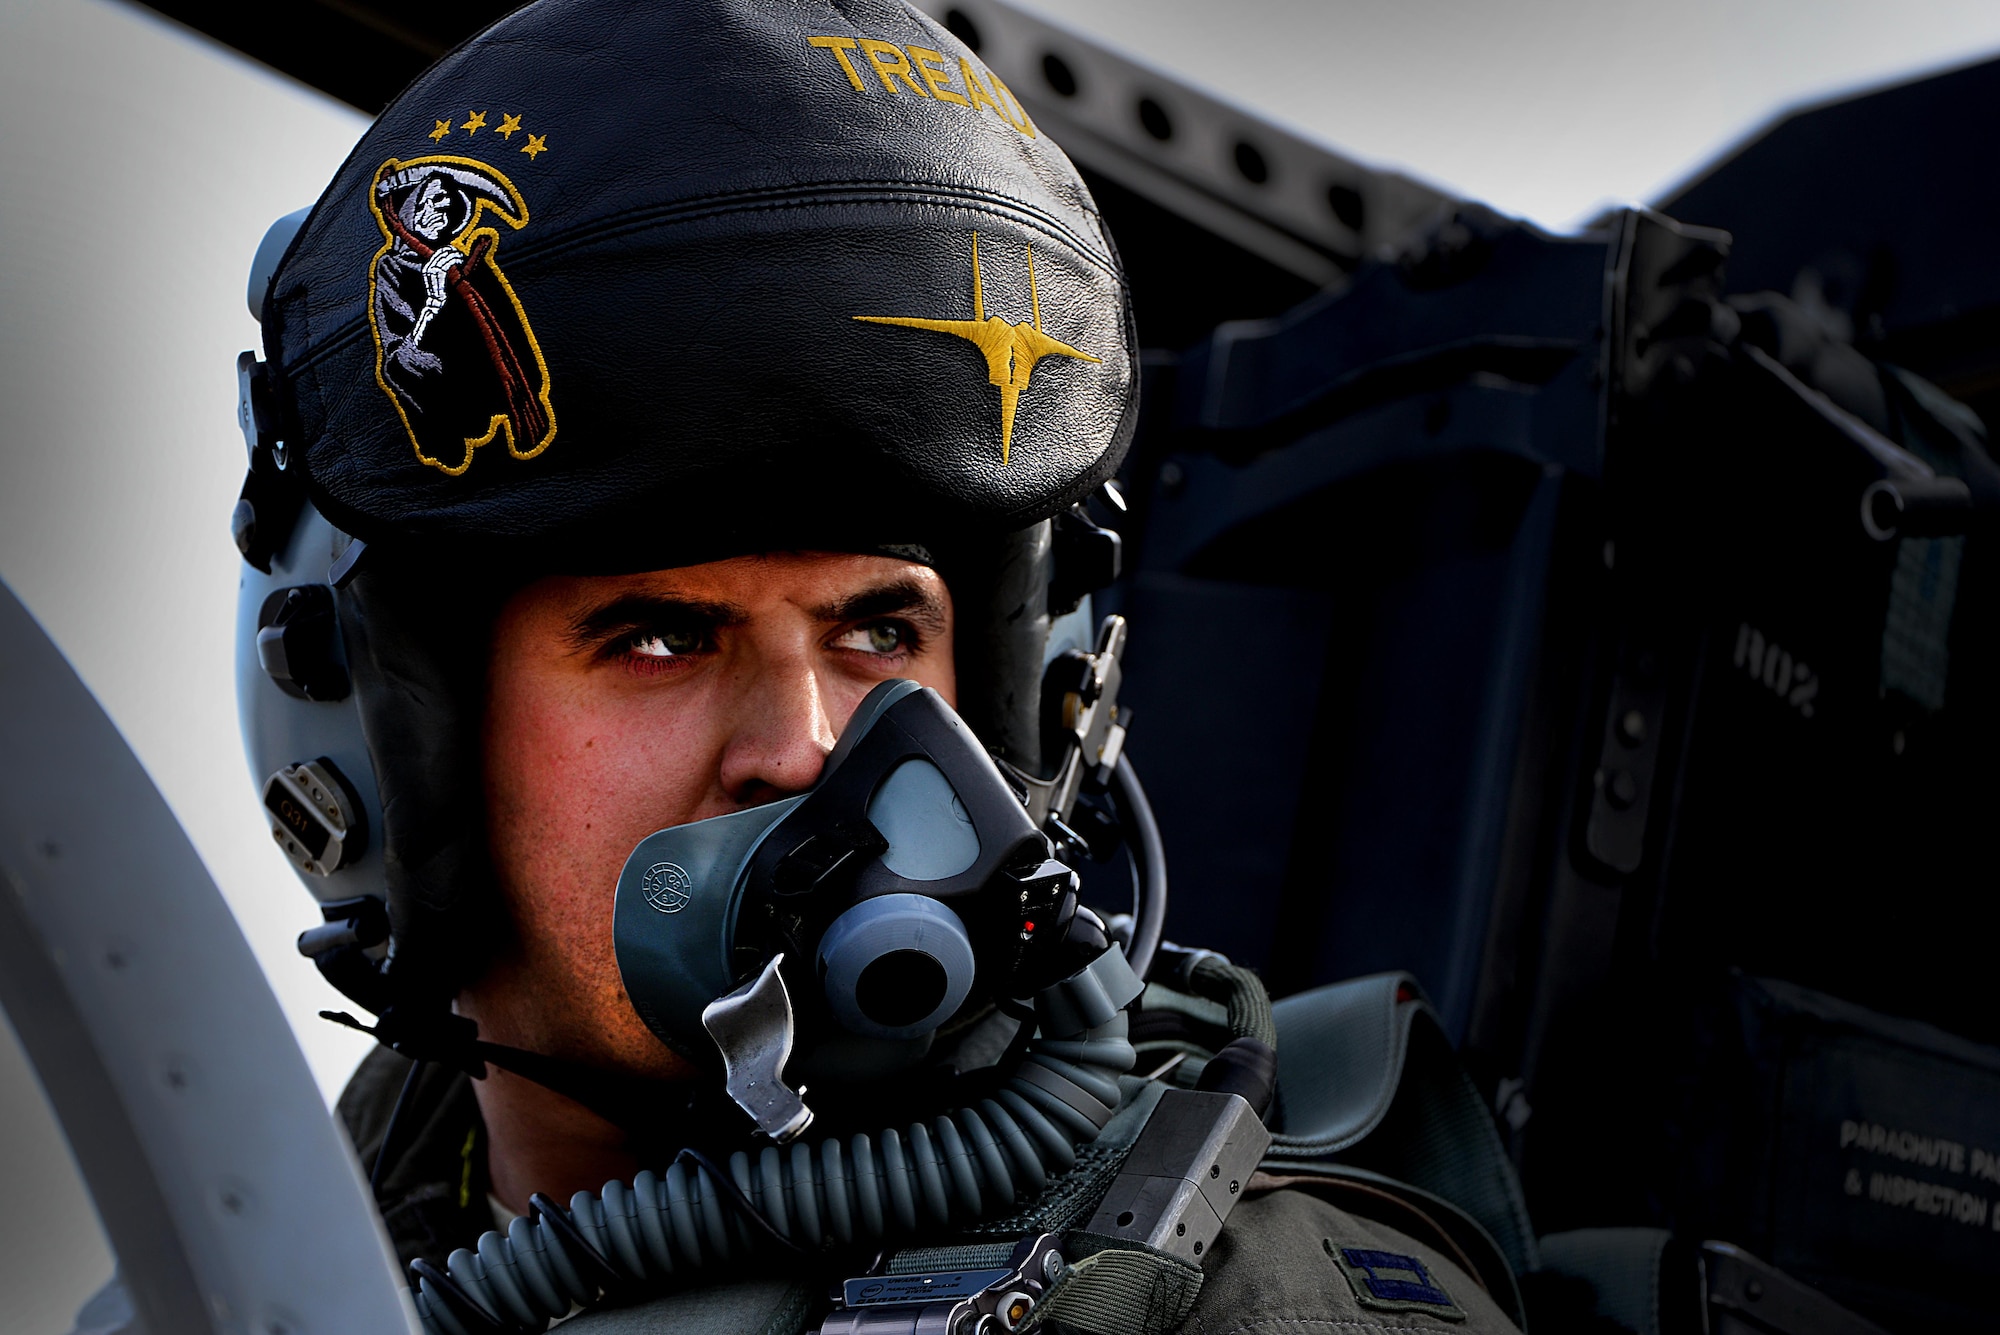 A pilot from the 493rd Expeditionary Fighter Squadron glances in the direction of his wingman prior to a Baltic Air Police sortie at Siauliai Air Base, Lithuania, Aug. 31, 2017. The U.S. presence for the current Baltic Air Policing mission comes at the request of its Baltic allies and further demonstrates its commitment to the security of fellow NATO nations. (U.S. Air Force photo/ Tech. Sgt. Matthew Plew)